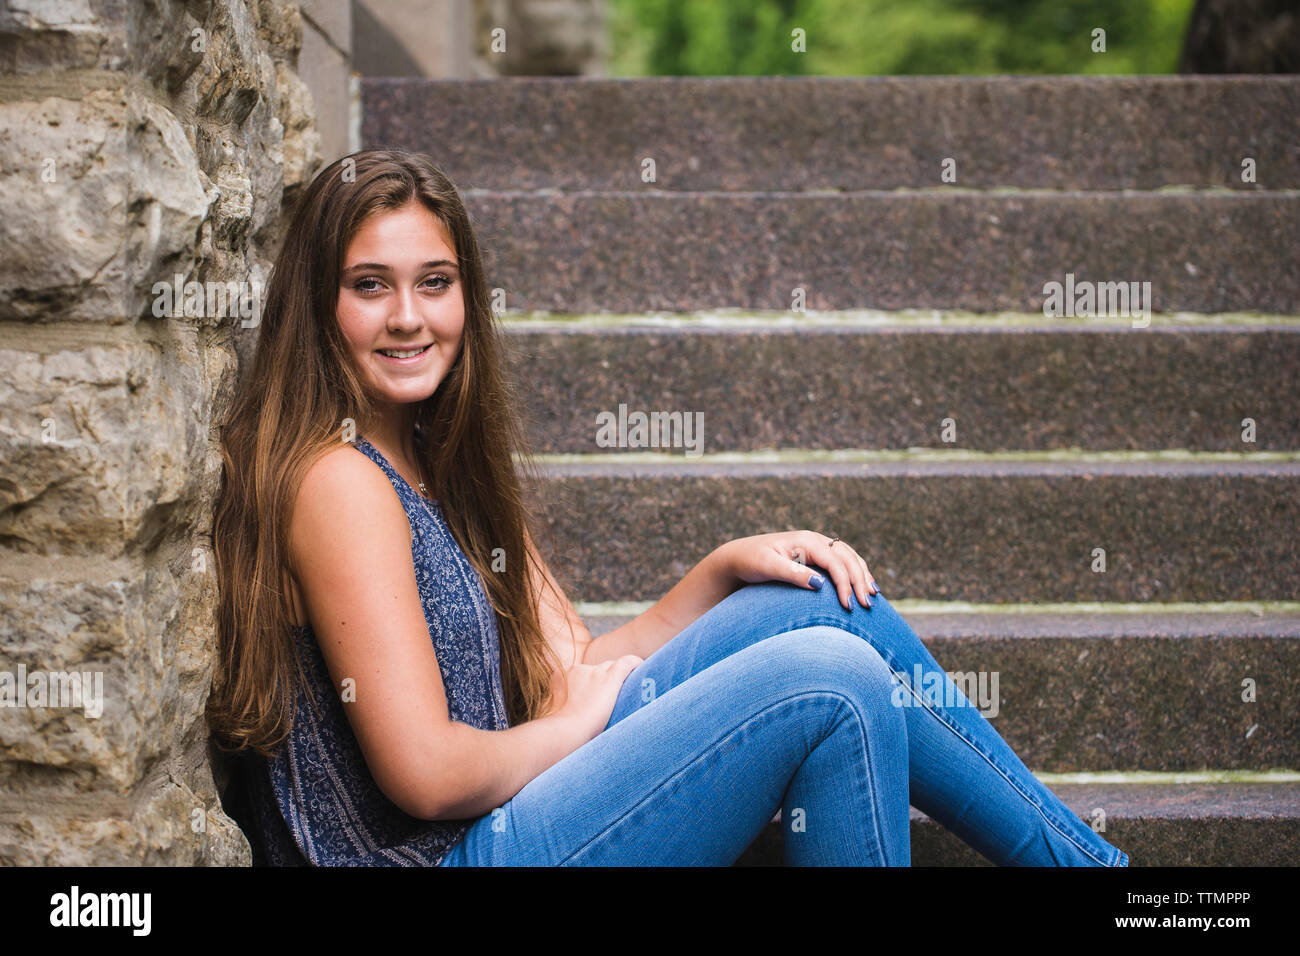 Portrait of smiling woman with long hair sitting on steps Banque D'Images